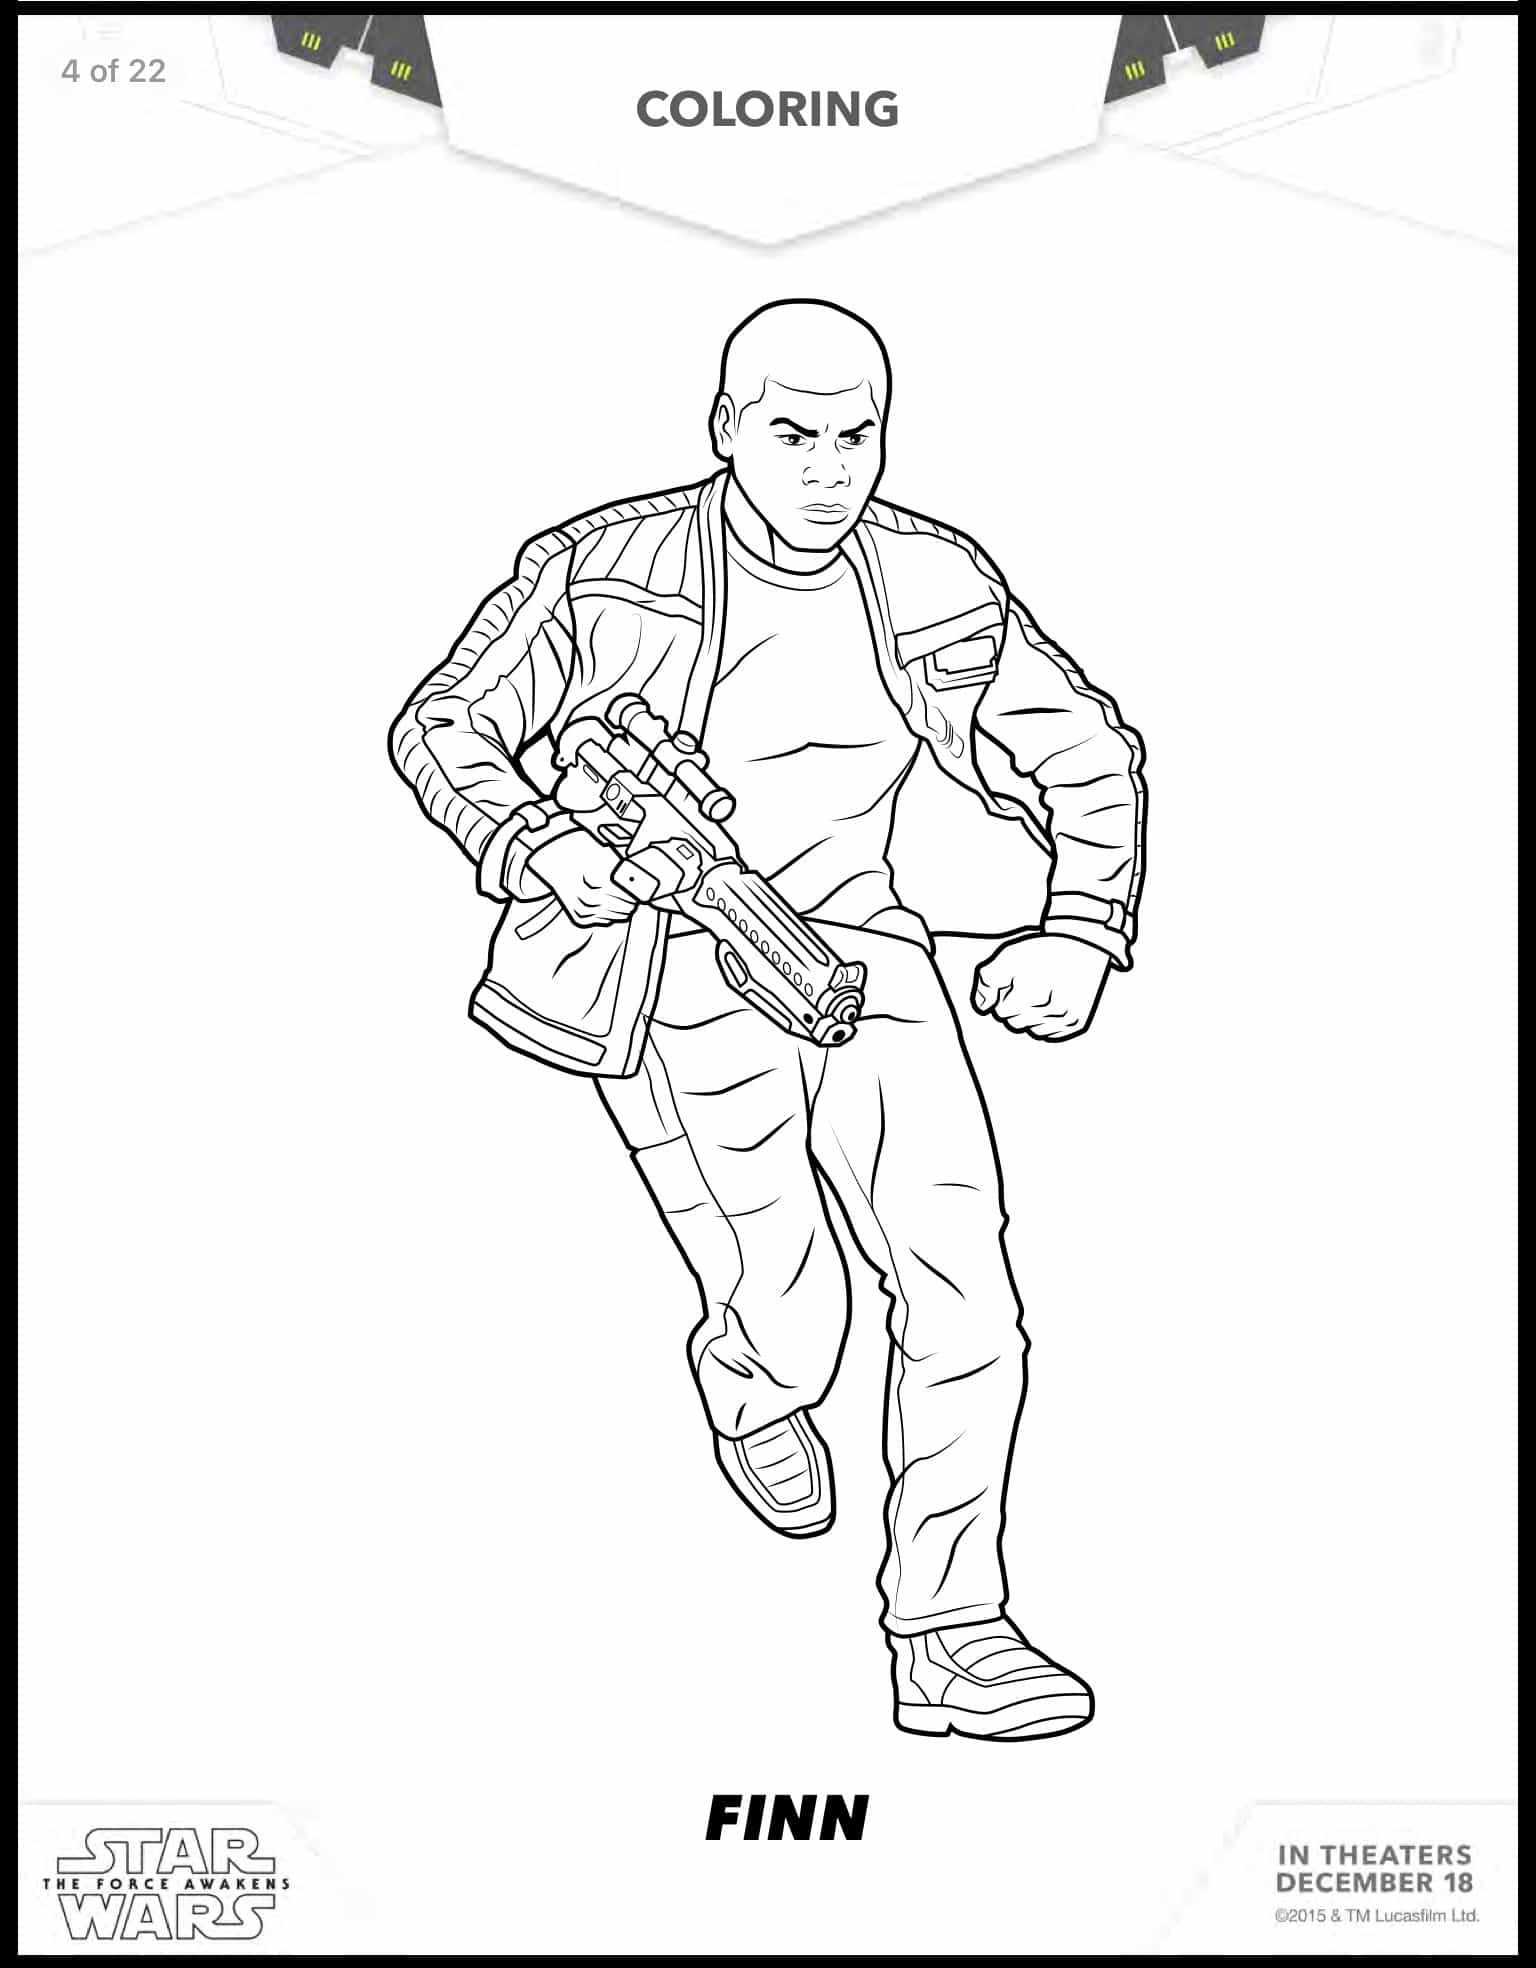 Star Wars Printables Coloring Pages
 8 Free Star Wars The Force Awakens Coloring Sheets